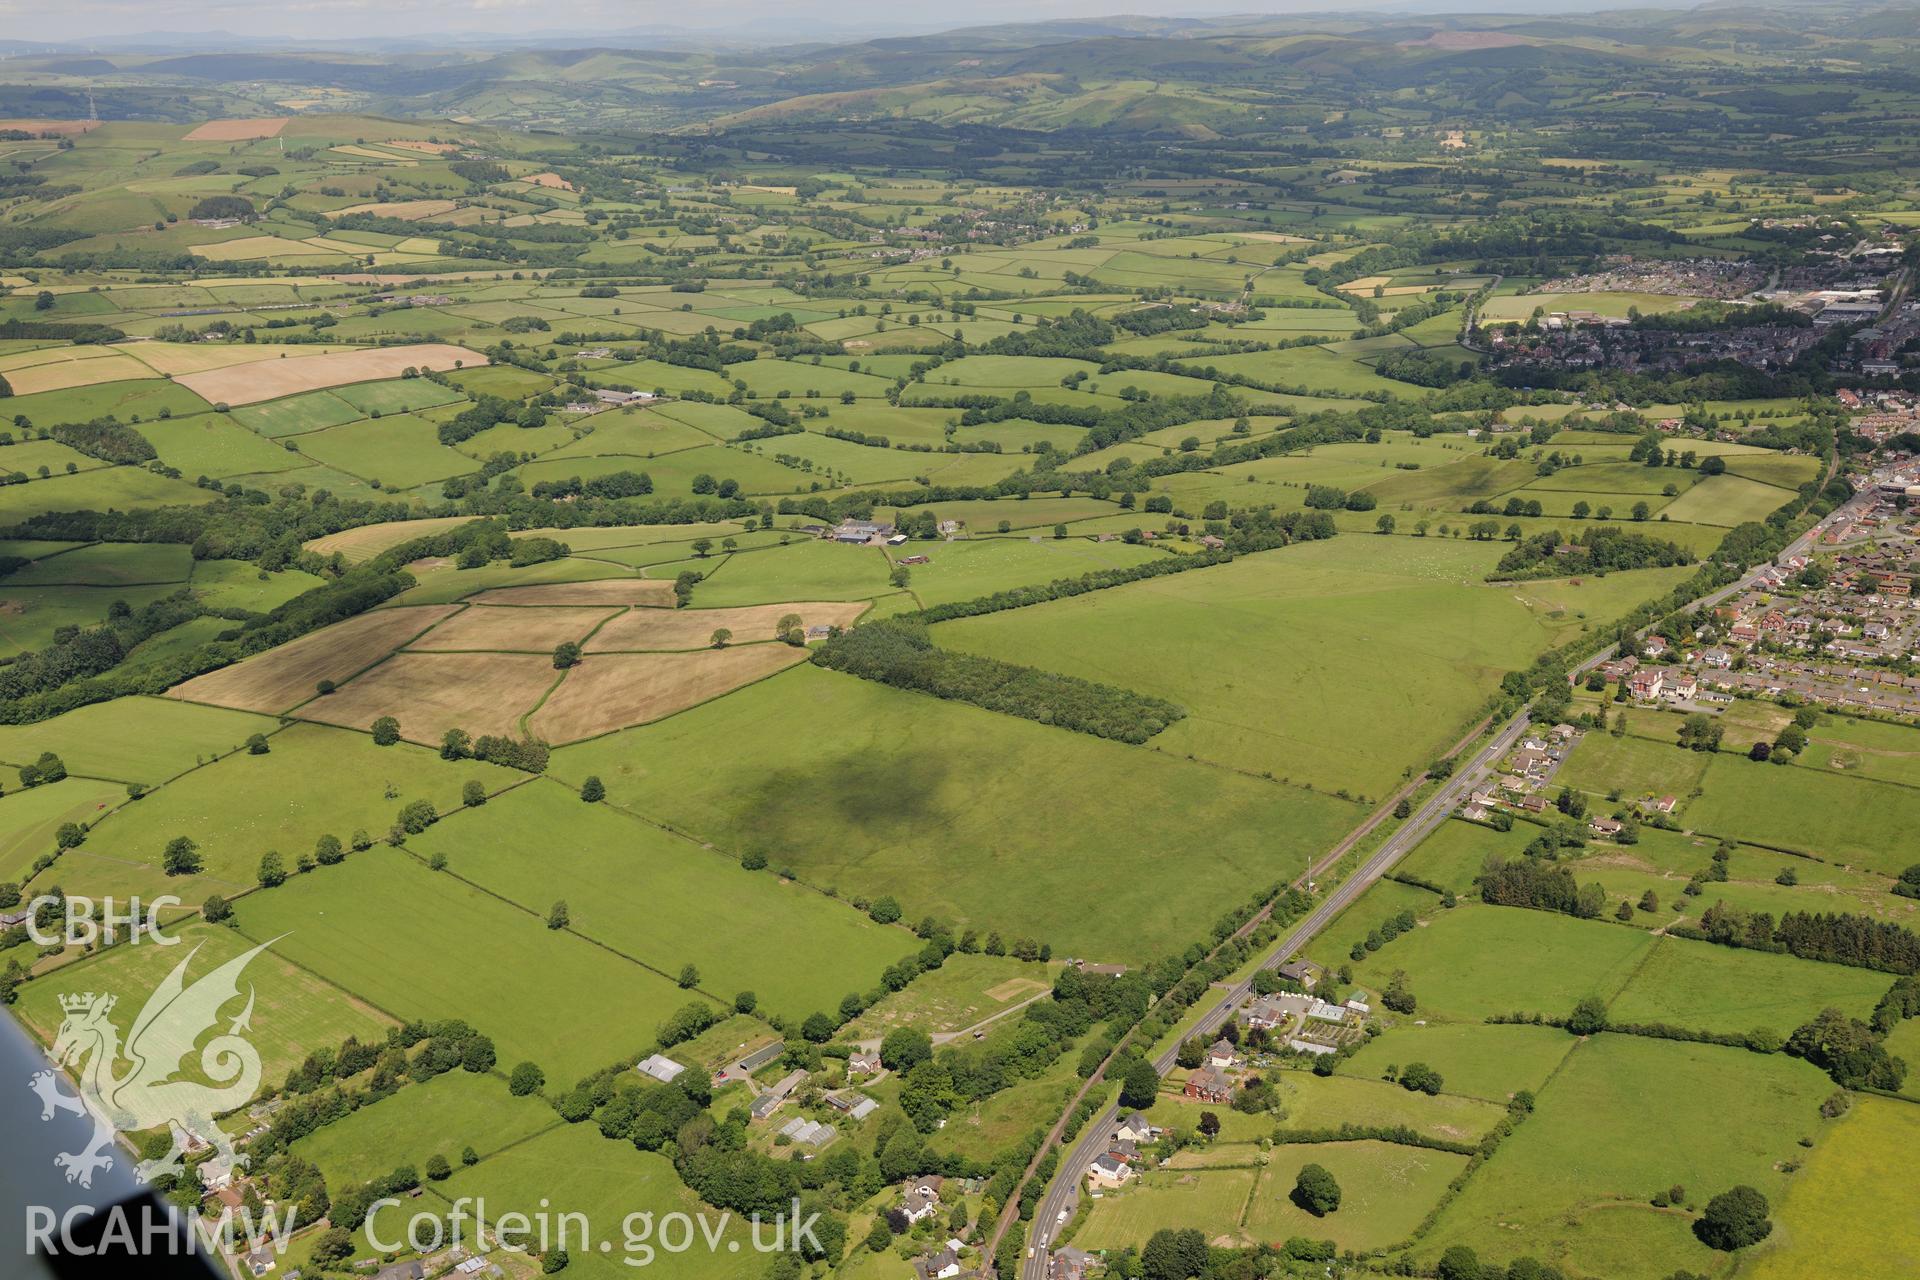 Llandrindod Common road camp XVI, south west of Llandrindod Wells on the A483. Oblique aerial photograph taken during the Royal Commission's programme of archaeological aerial reconnaissance by Toby Driver on 30th June 2015.